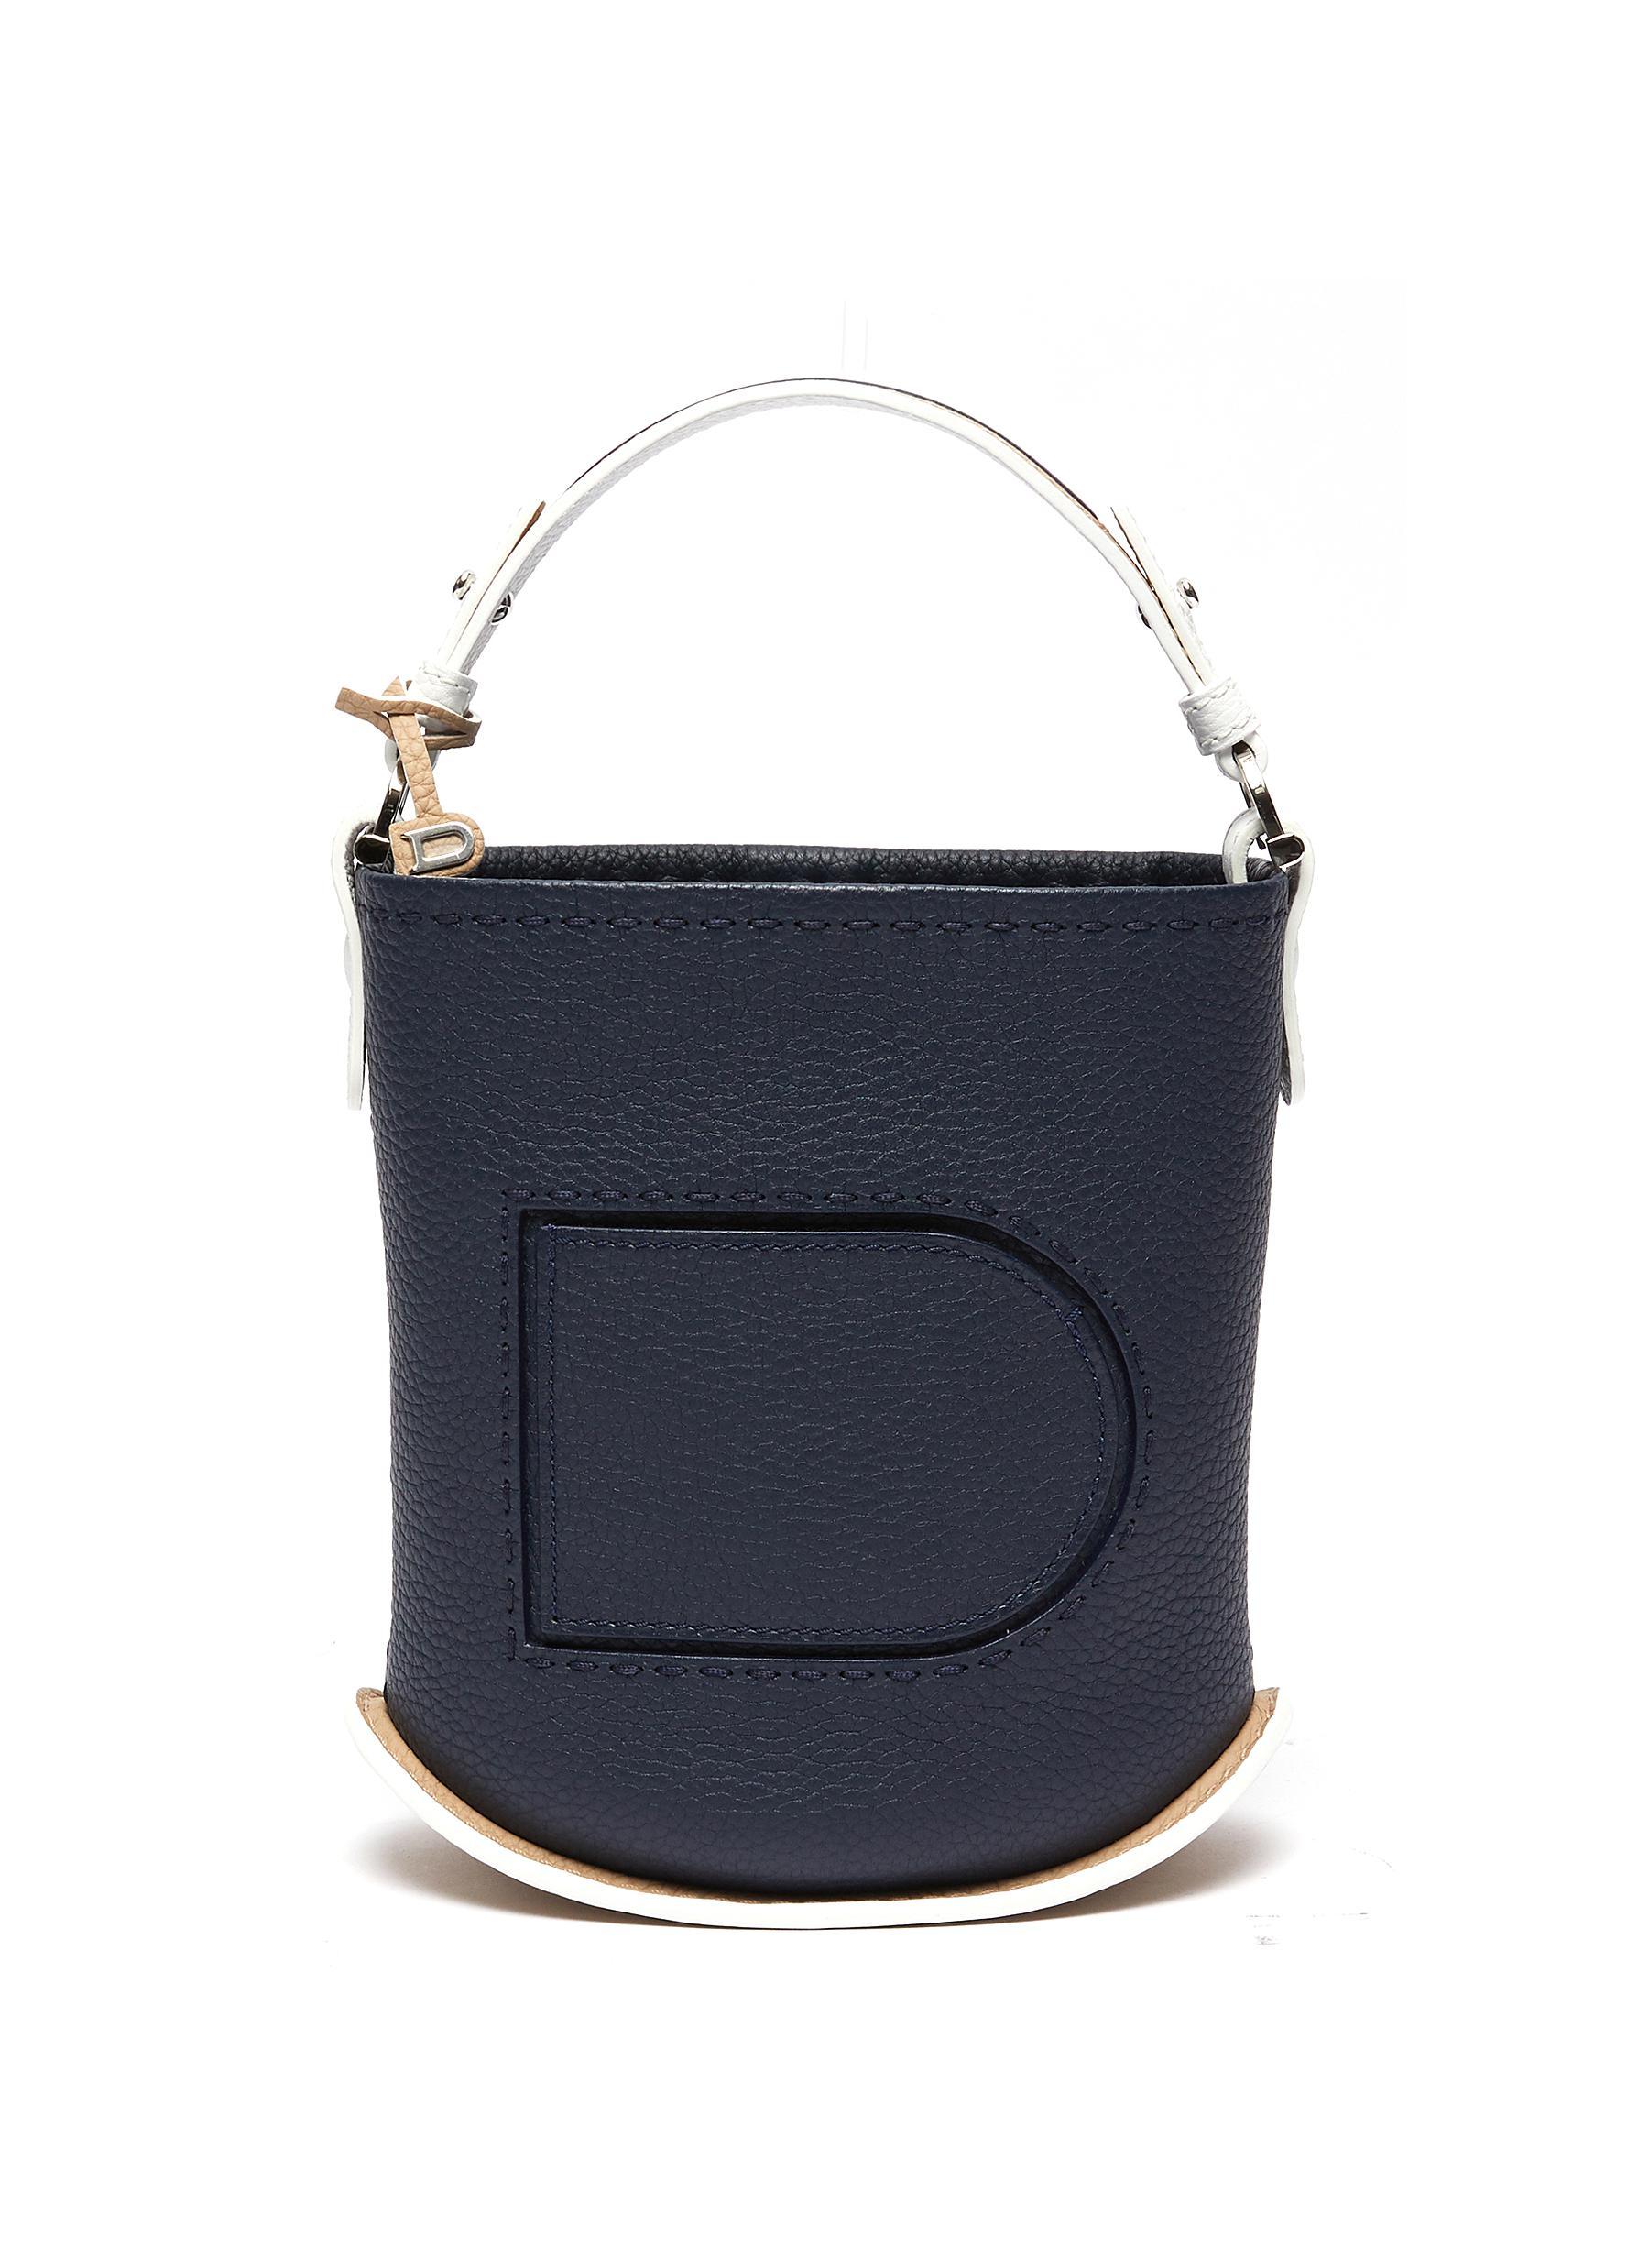 Delvaux Pin Mini' Leather Bucket Bag in Navy (Blue) - Lyst